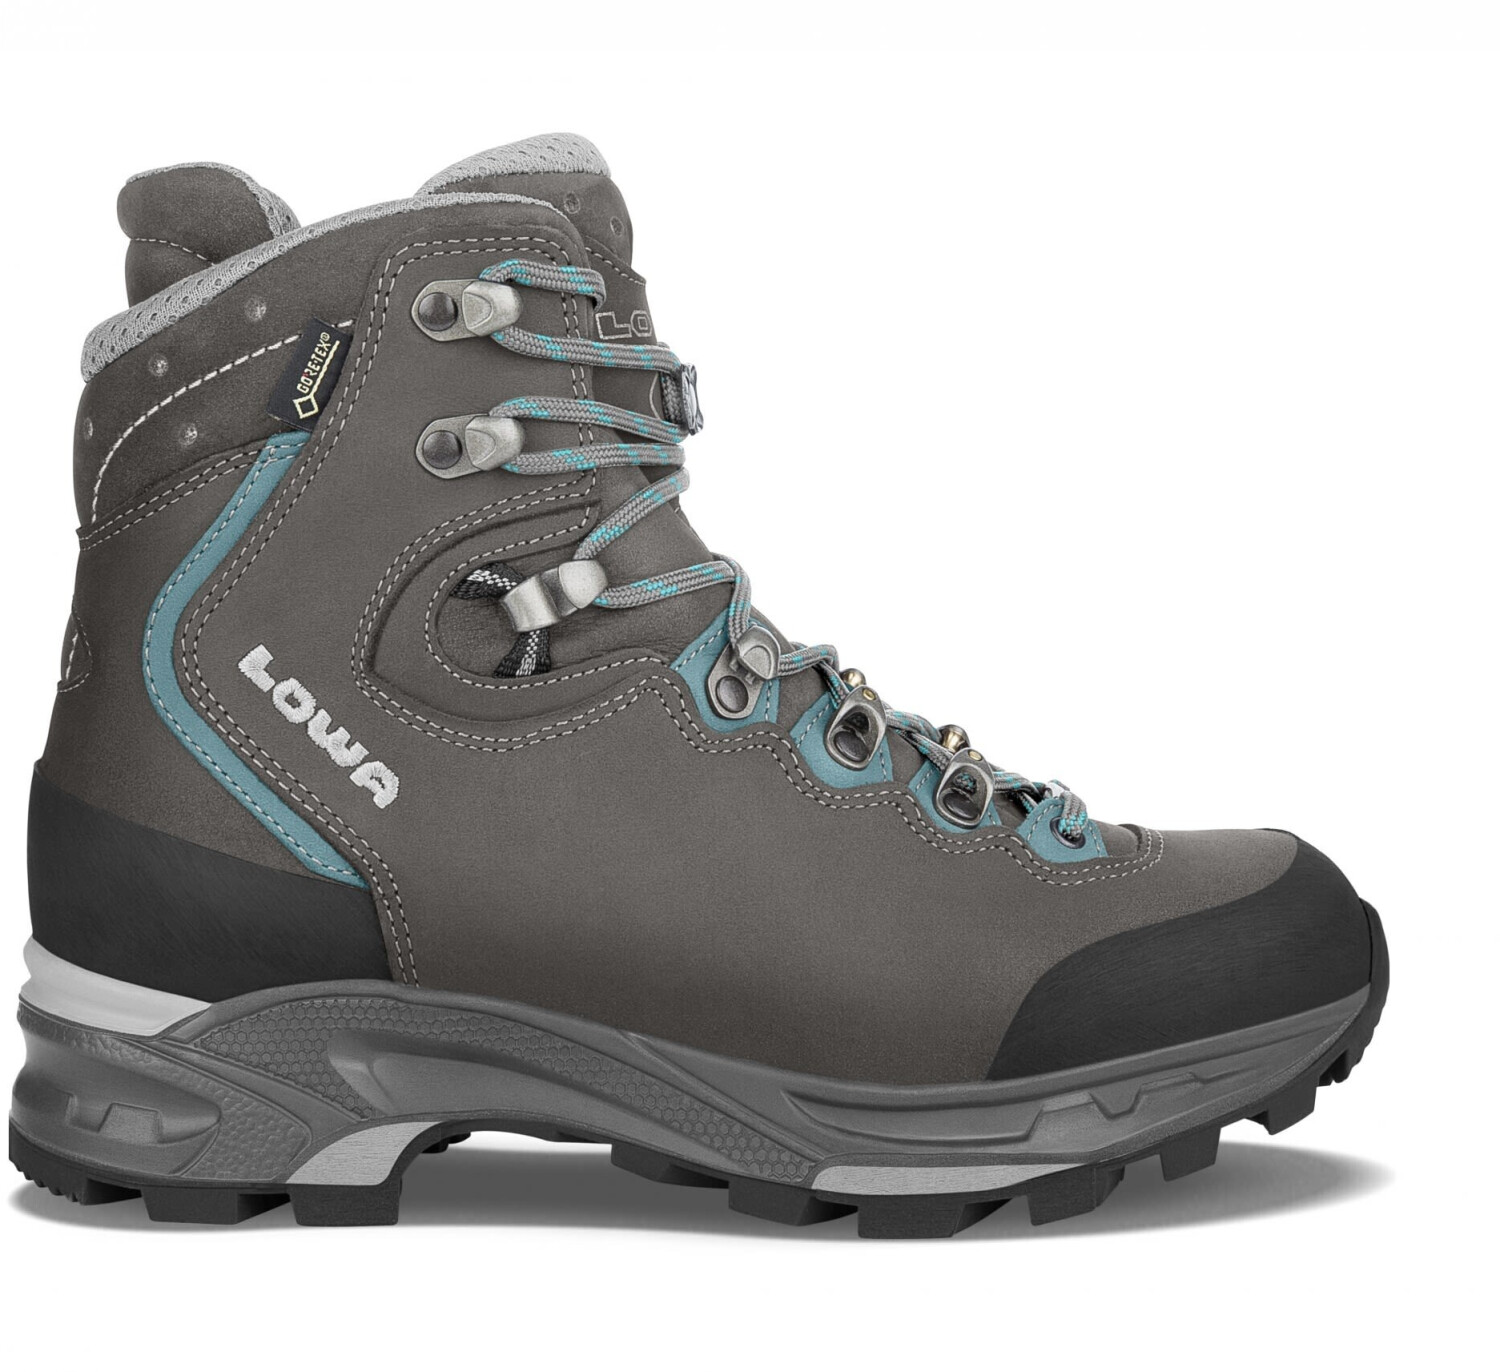 Buy Lowa Mauria GTX Ws anthracite/petrol from £165.50 (Today) – Best ...